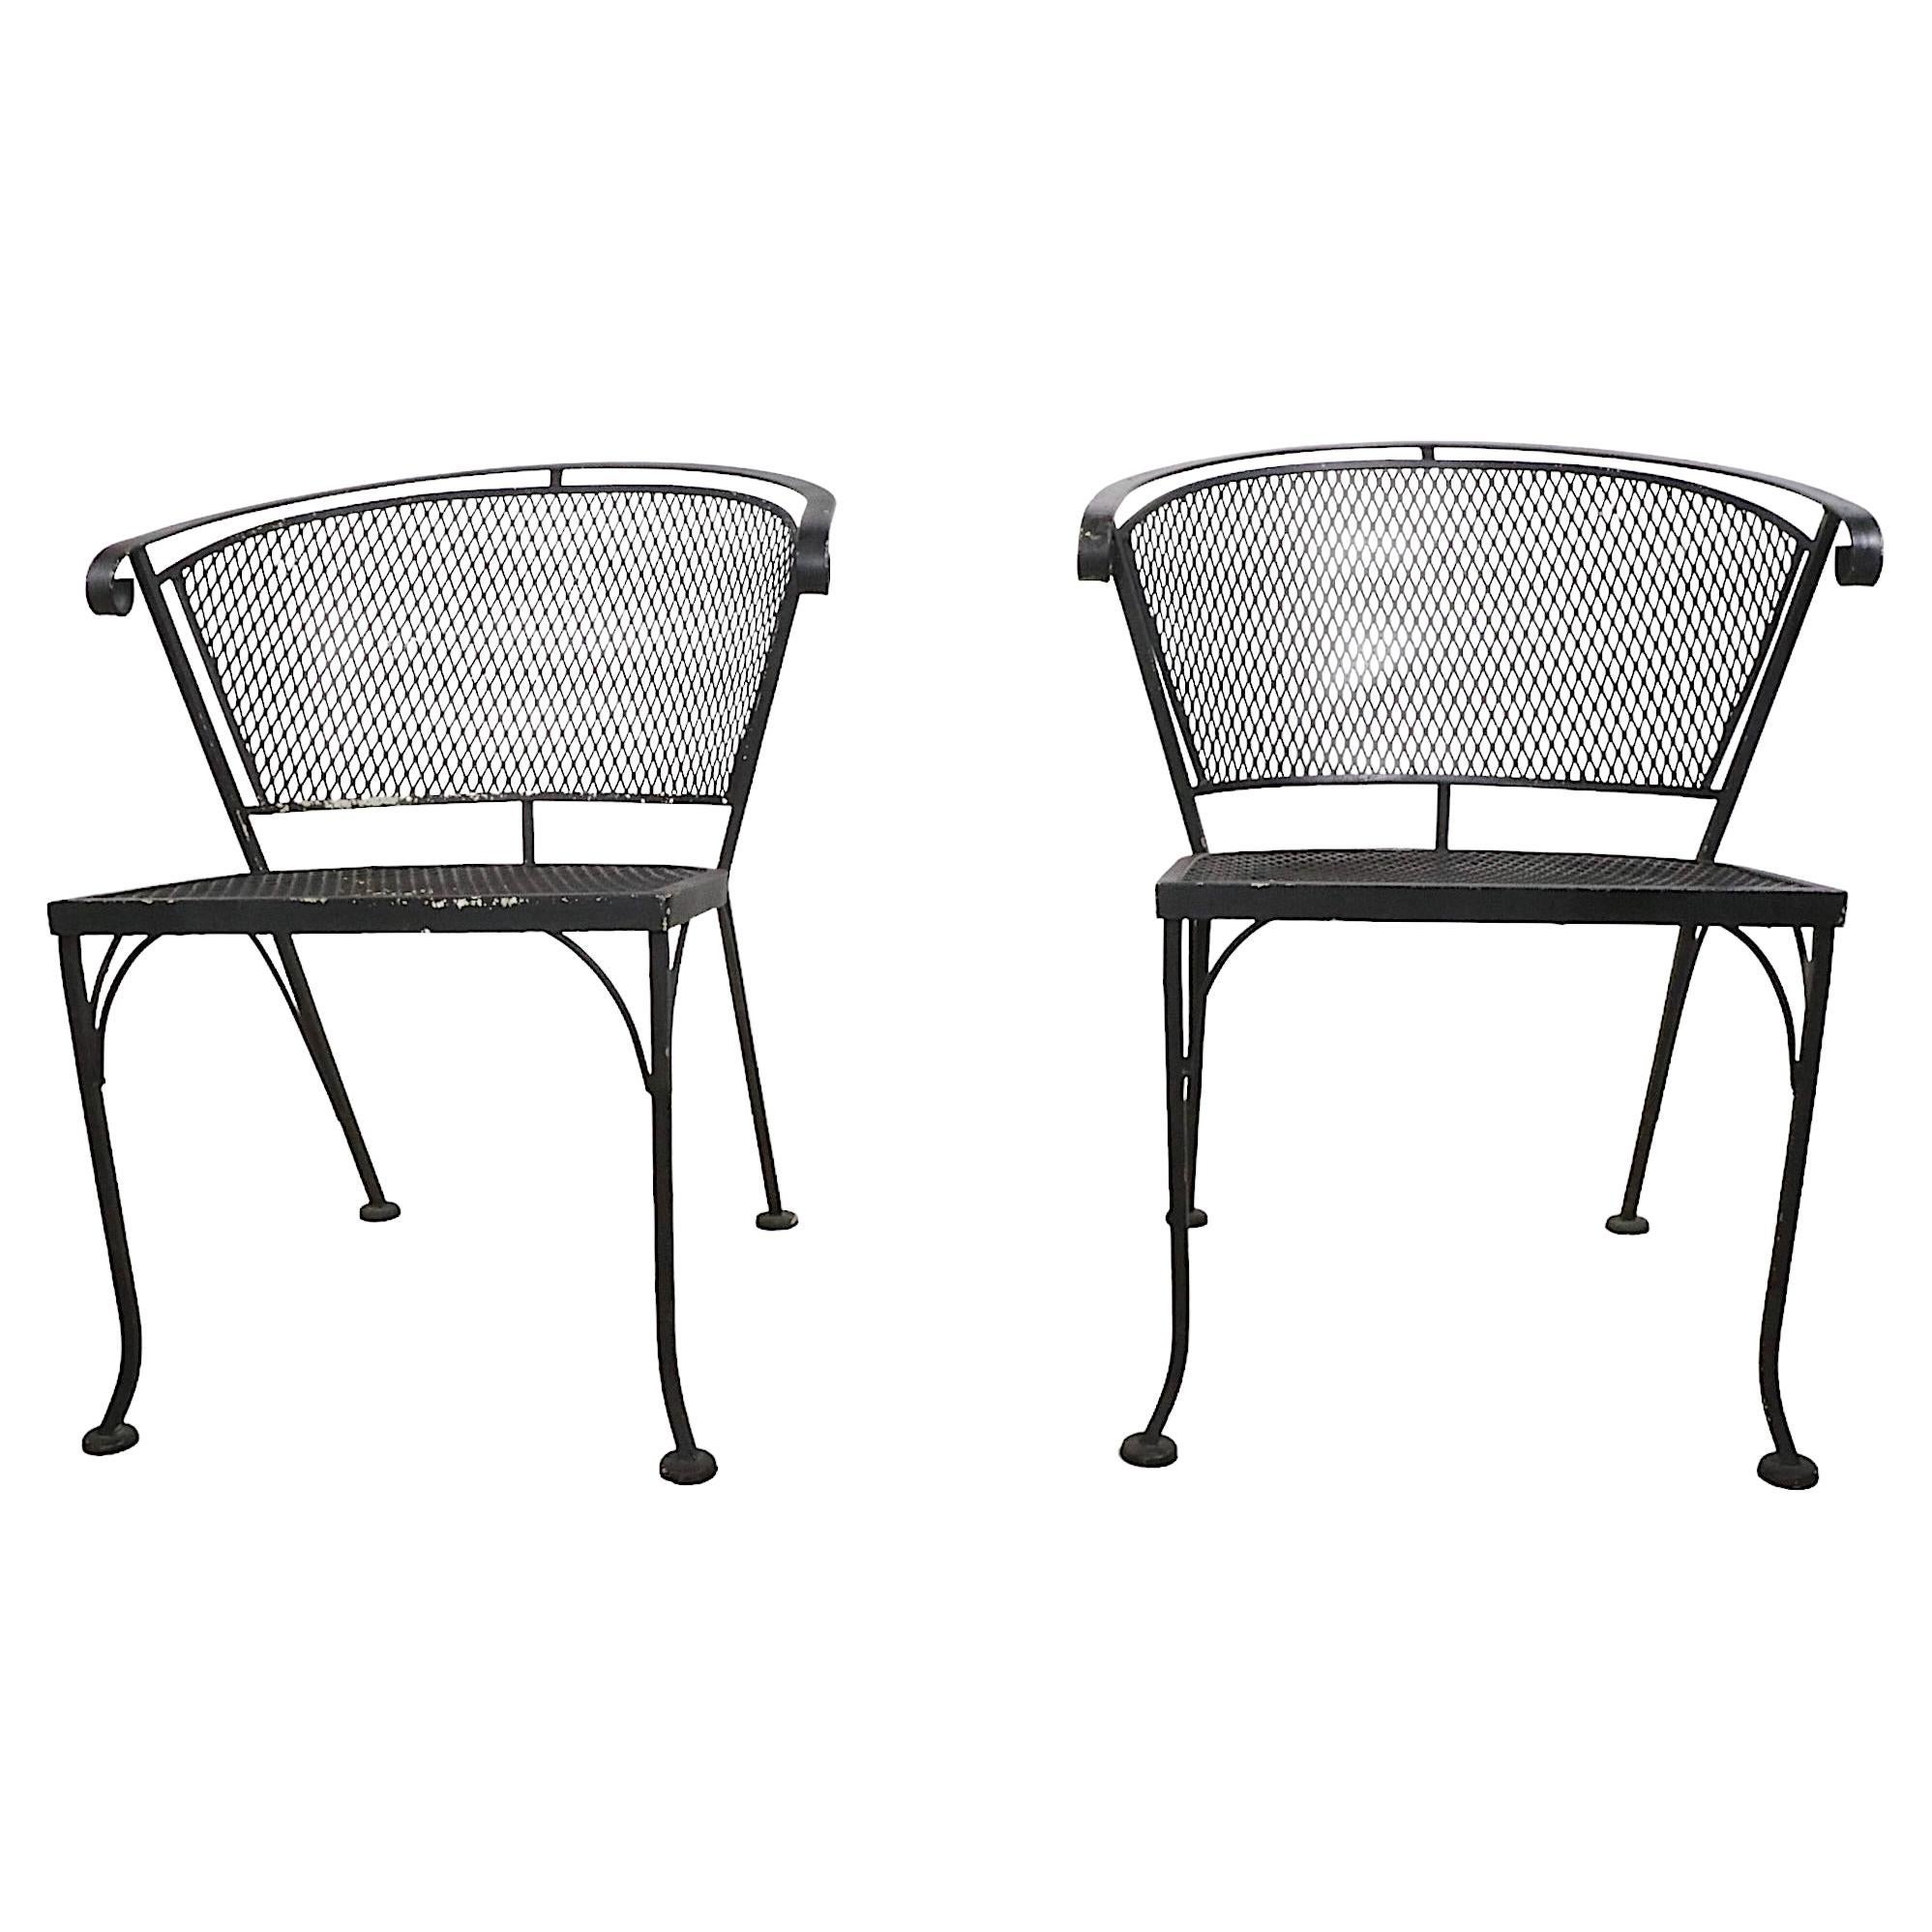 Pr Vintage  Woodard Garden Patio Poolside Chairs in Wrought Iron and Metal Mesh 